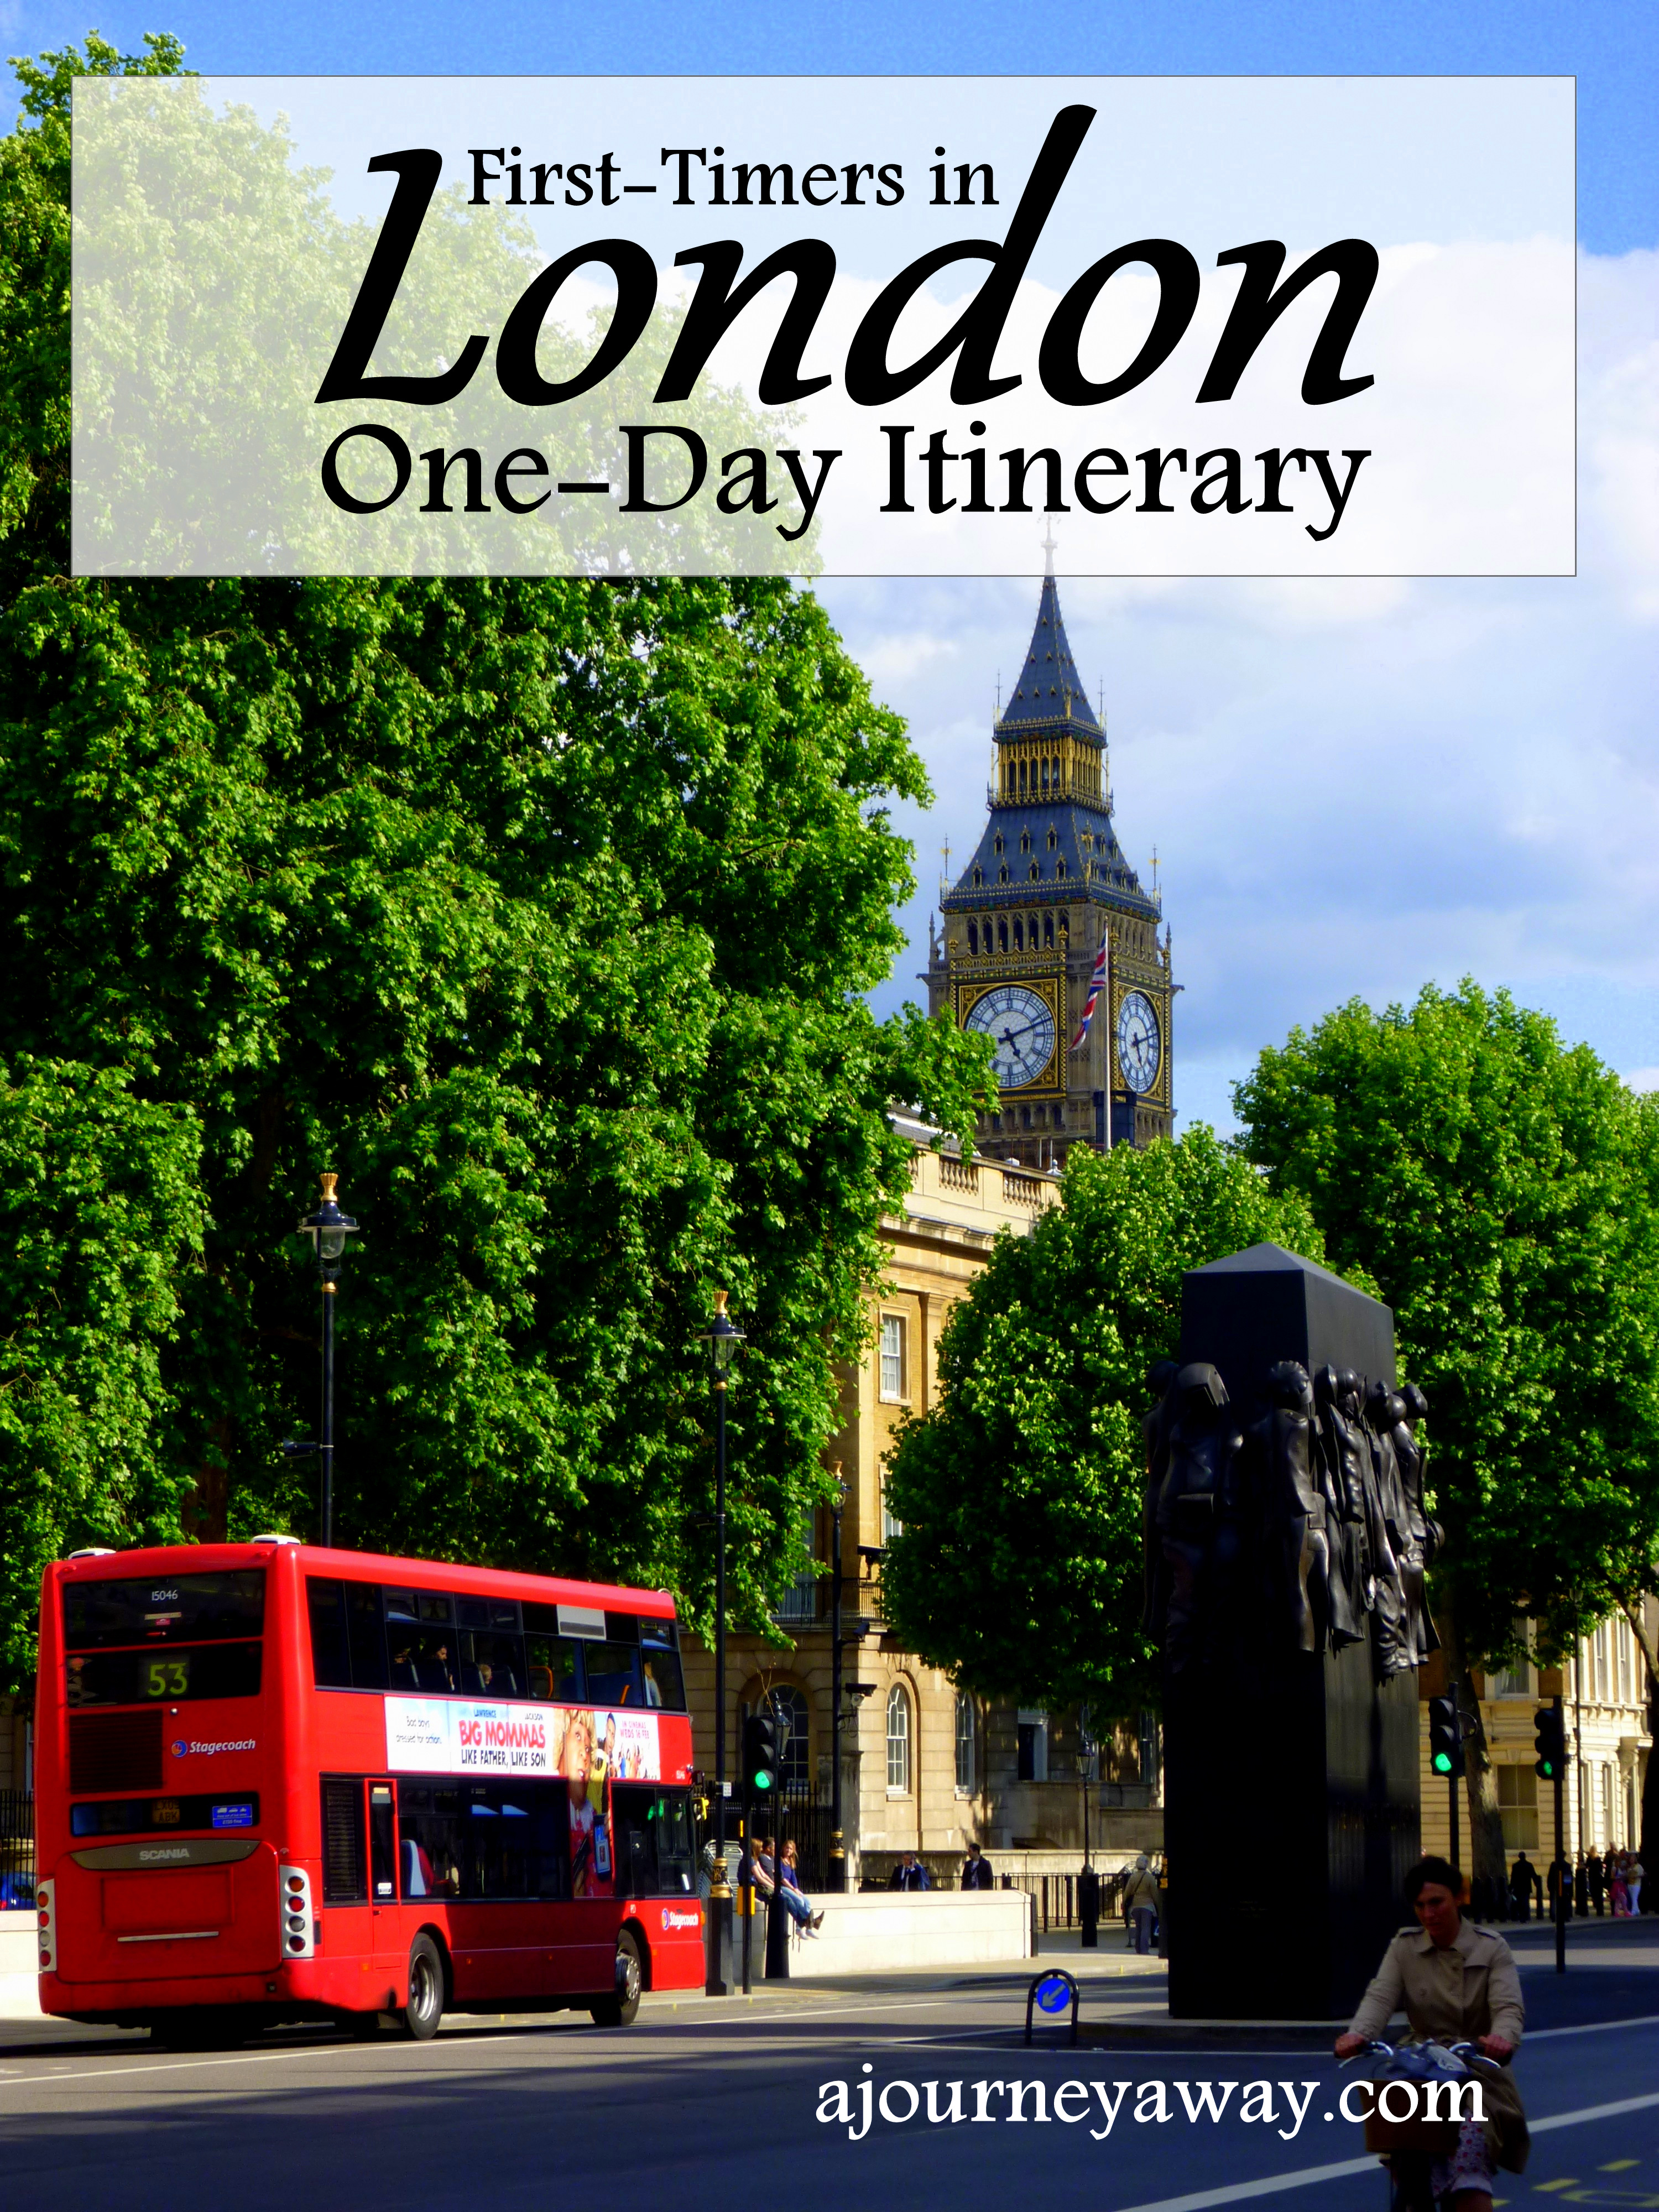 One-day itinerary in London for first-timers